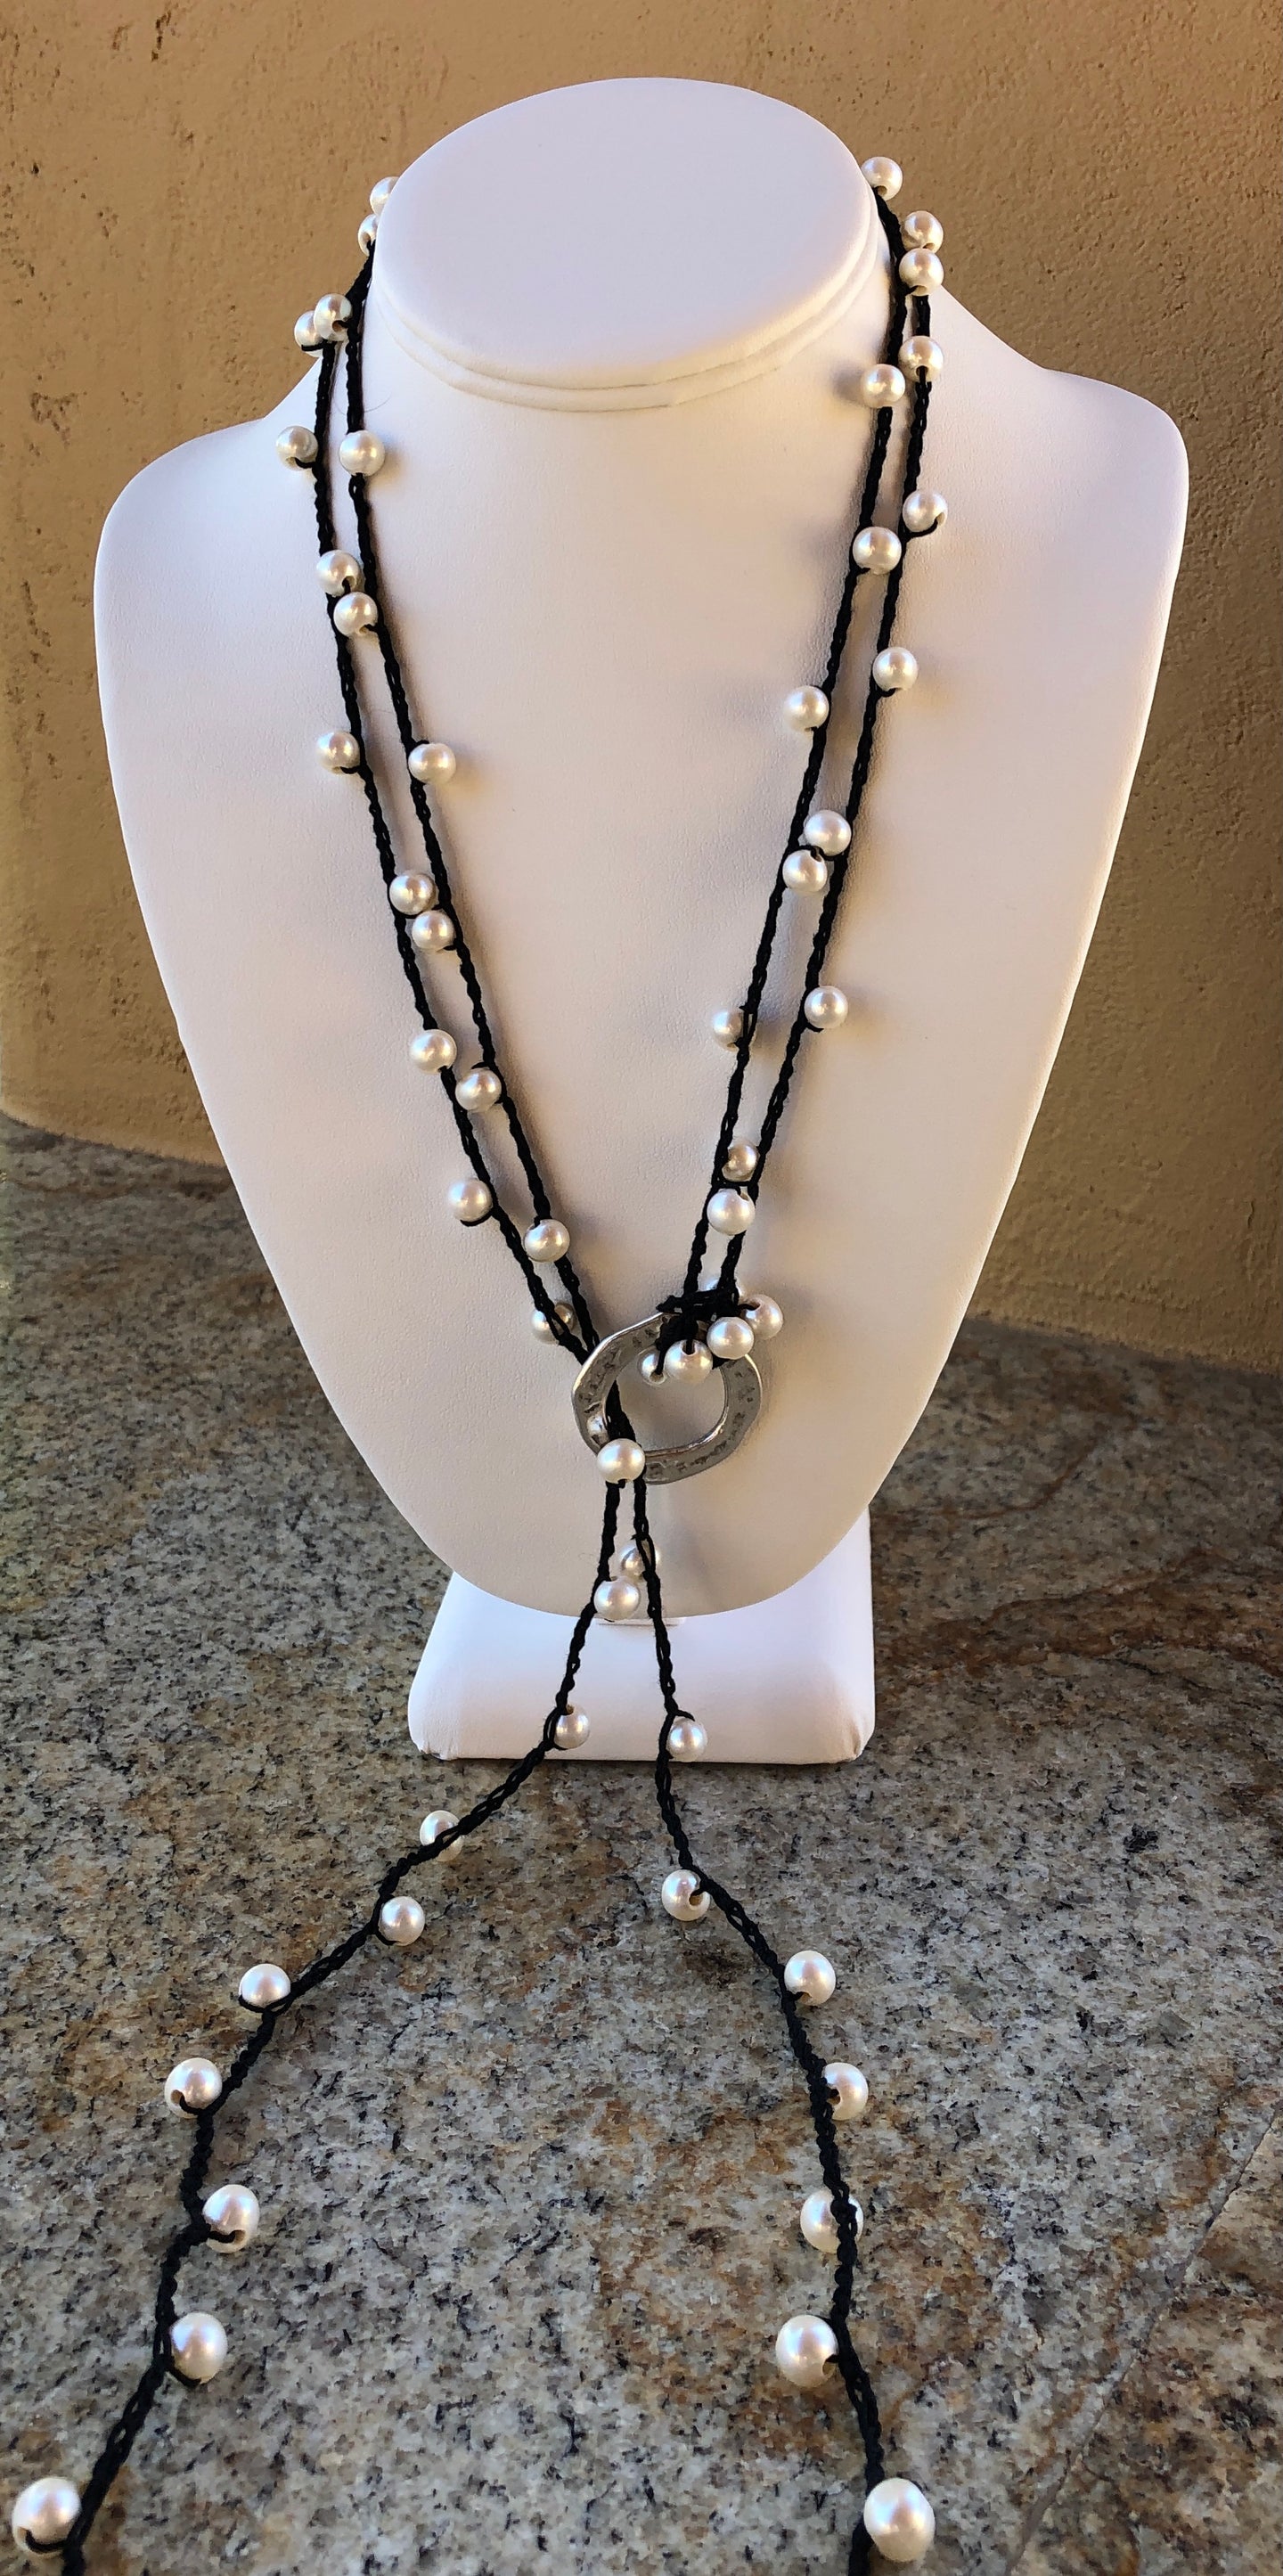 Necklace - Double crocheted lariat with pearls